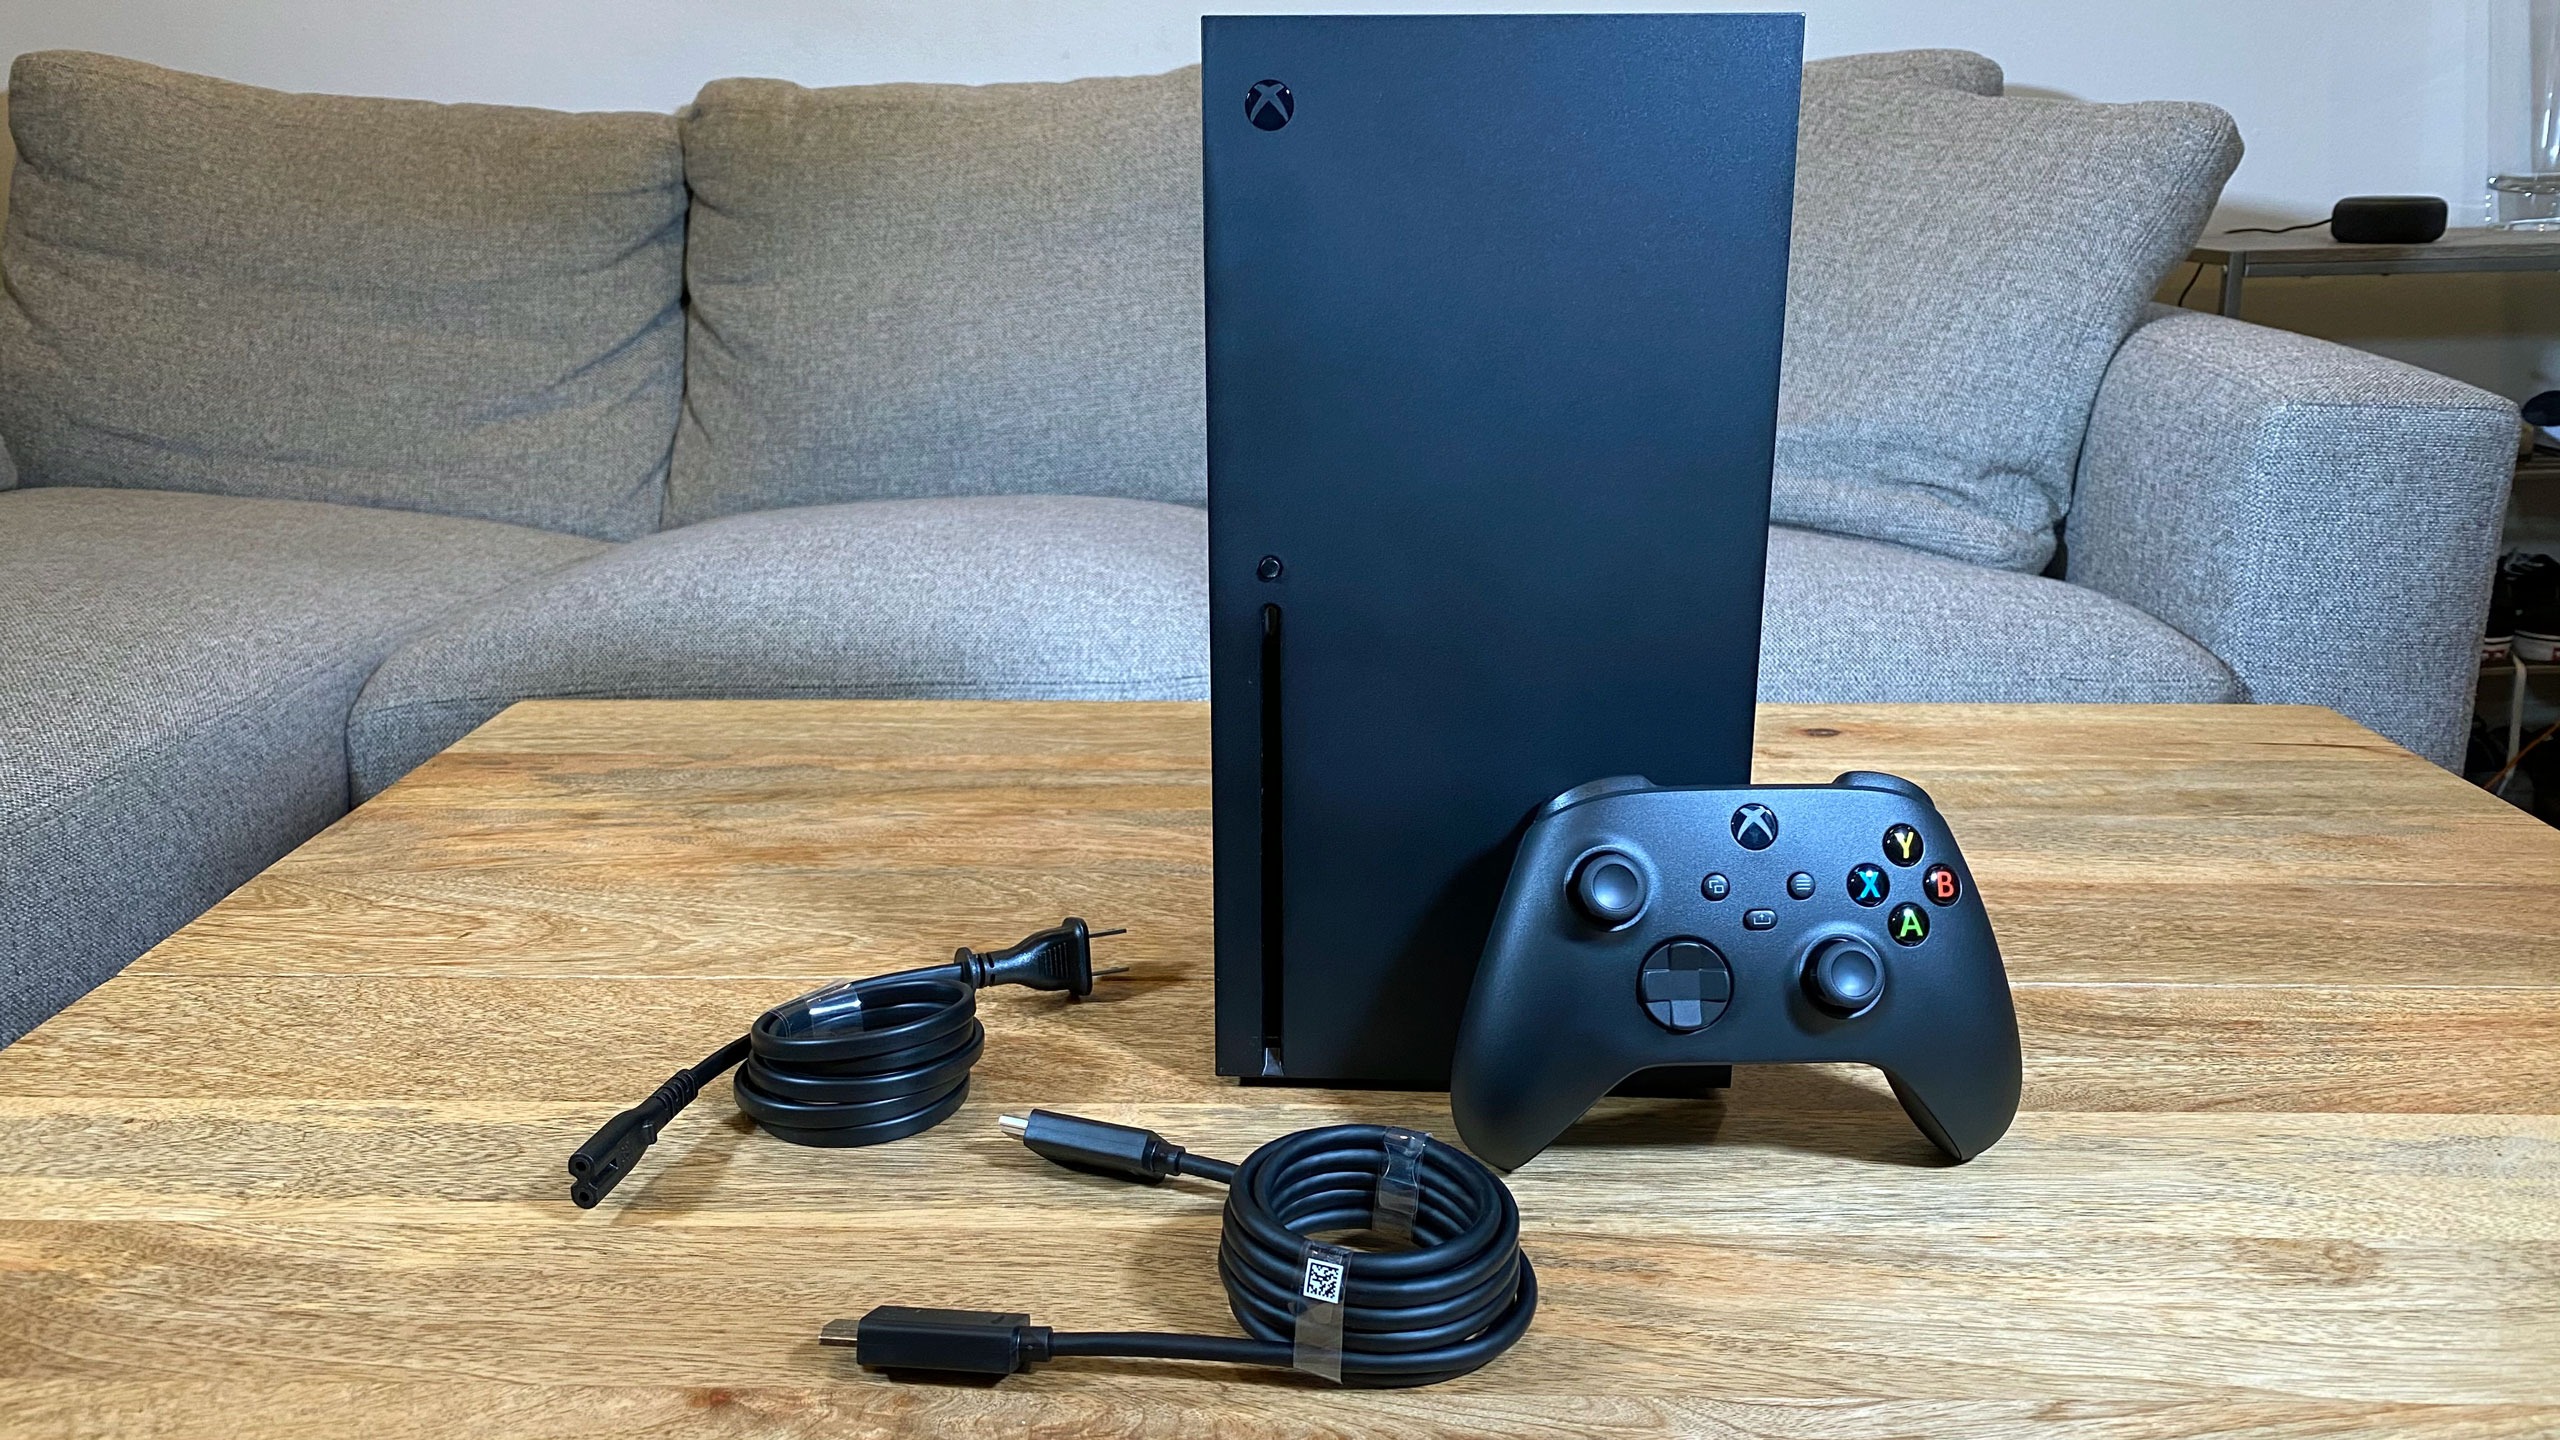 Video: First reaction to unboxing the Xbox Series X